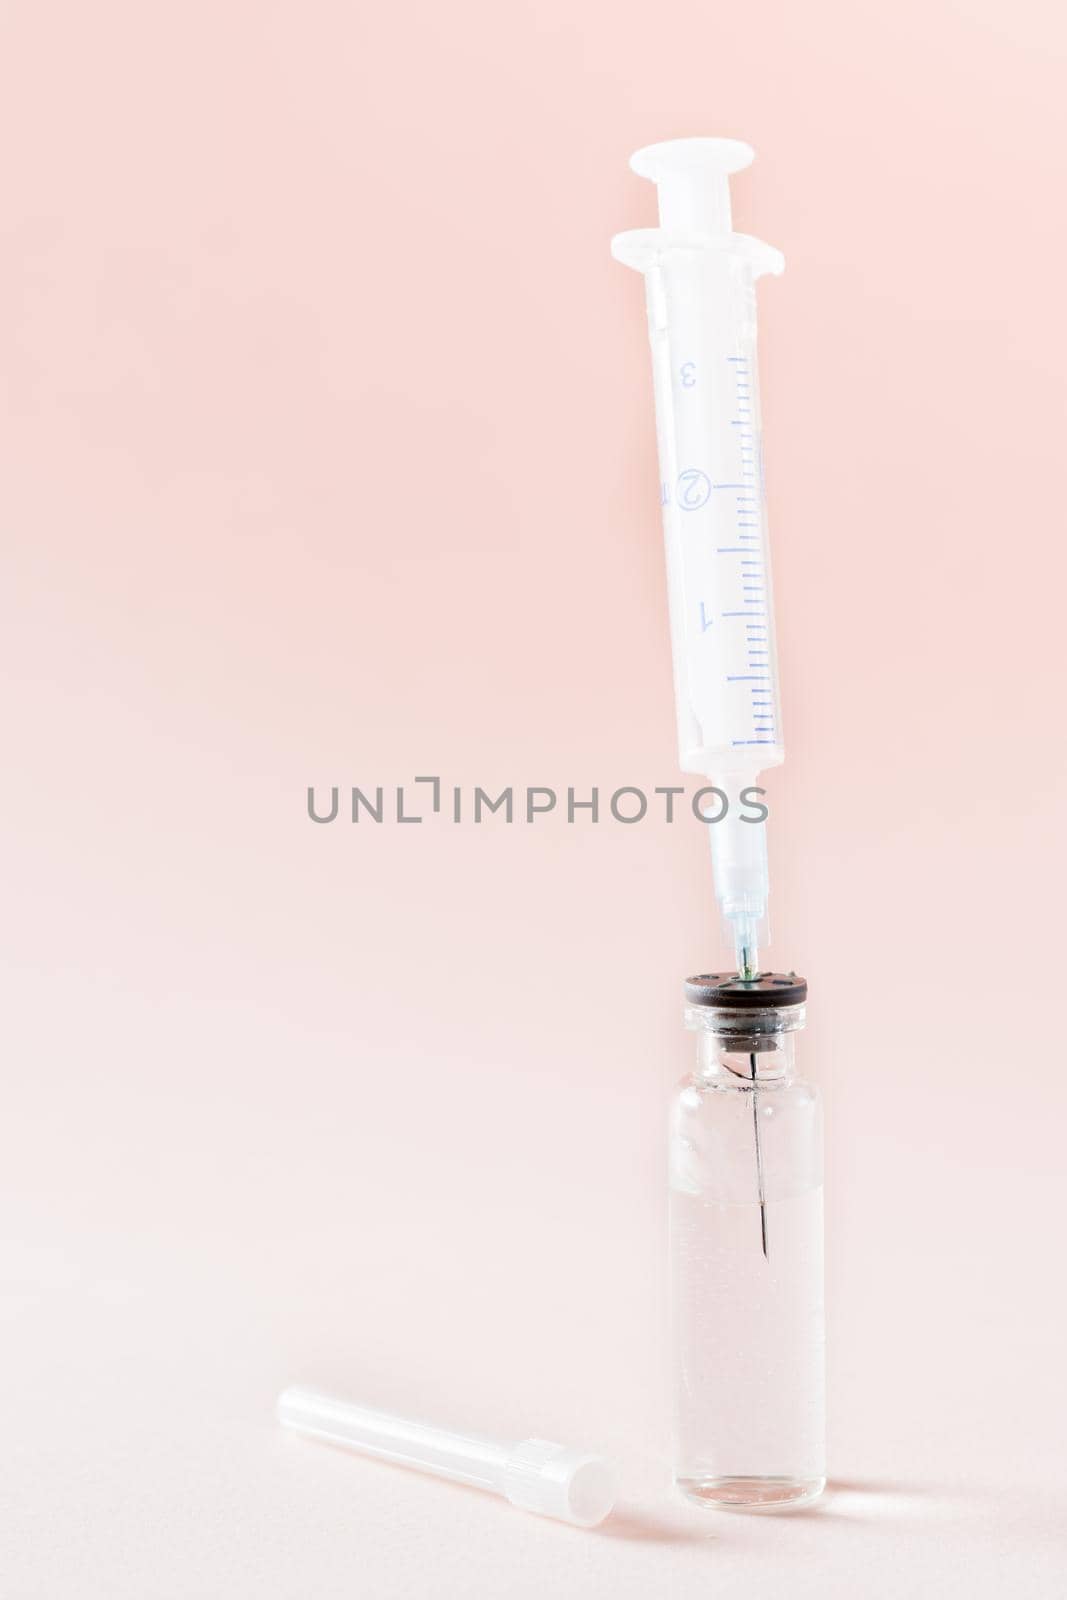 Vaccination and Immunization. Syringe needle inserted into a glass vial with vaccine. Vertical view by Aleruana